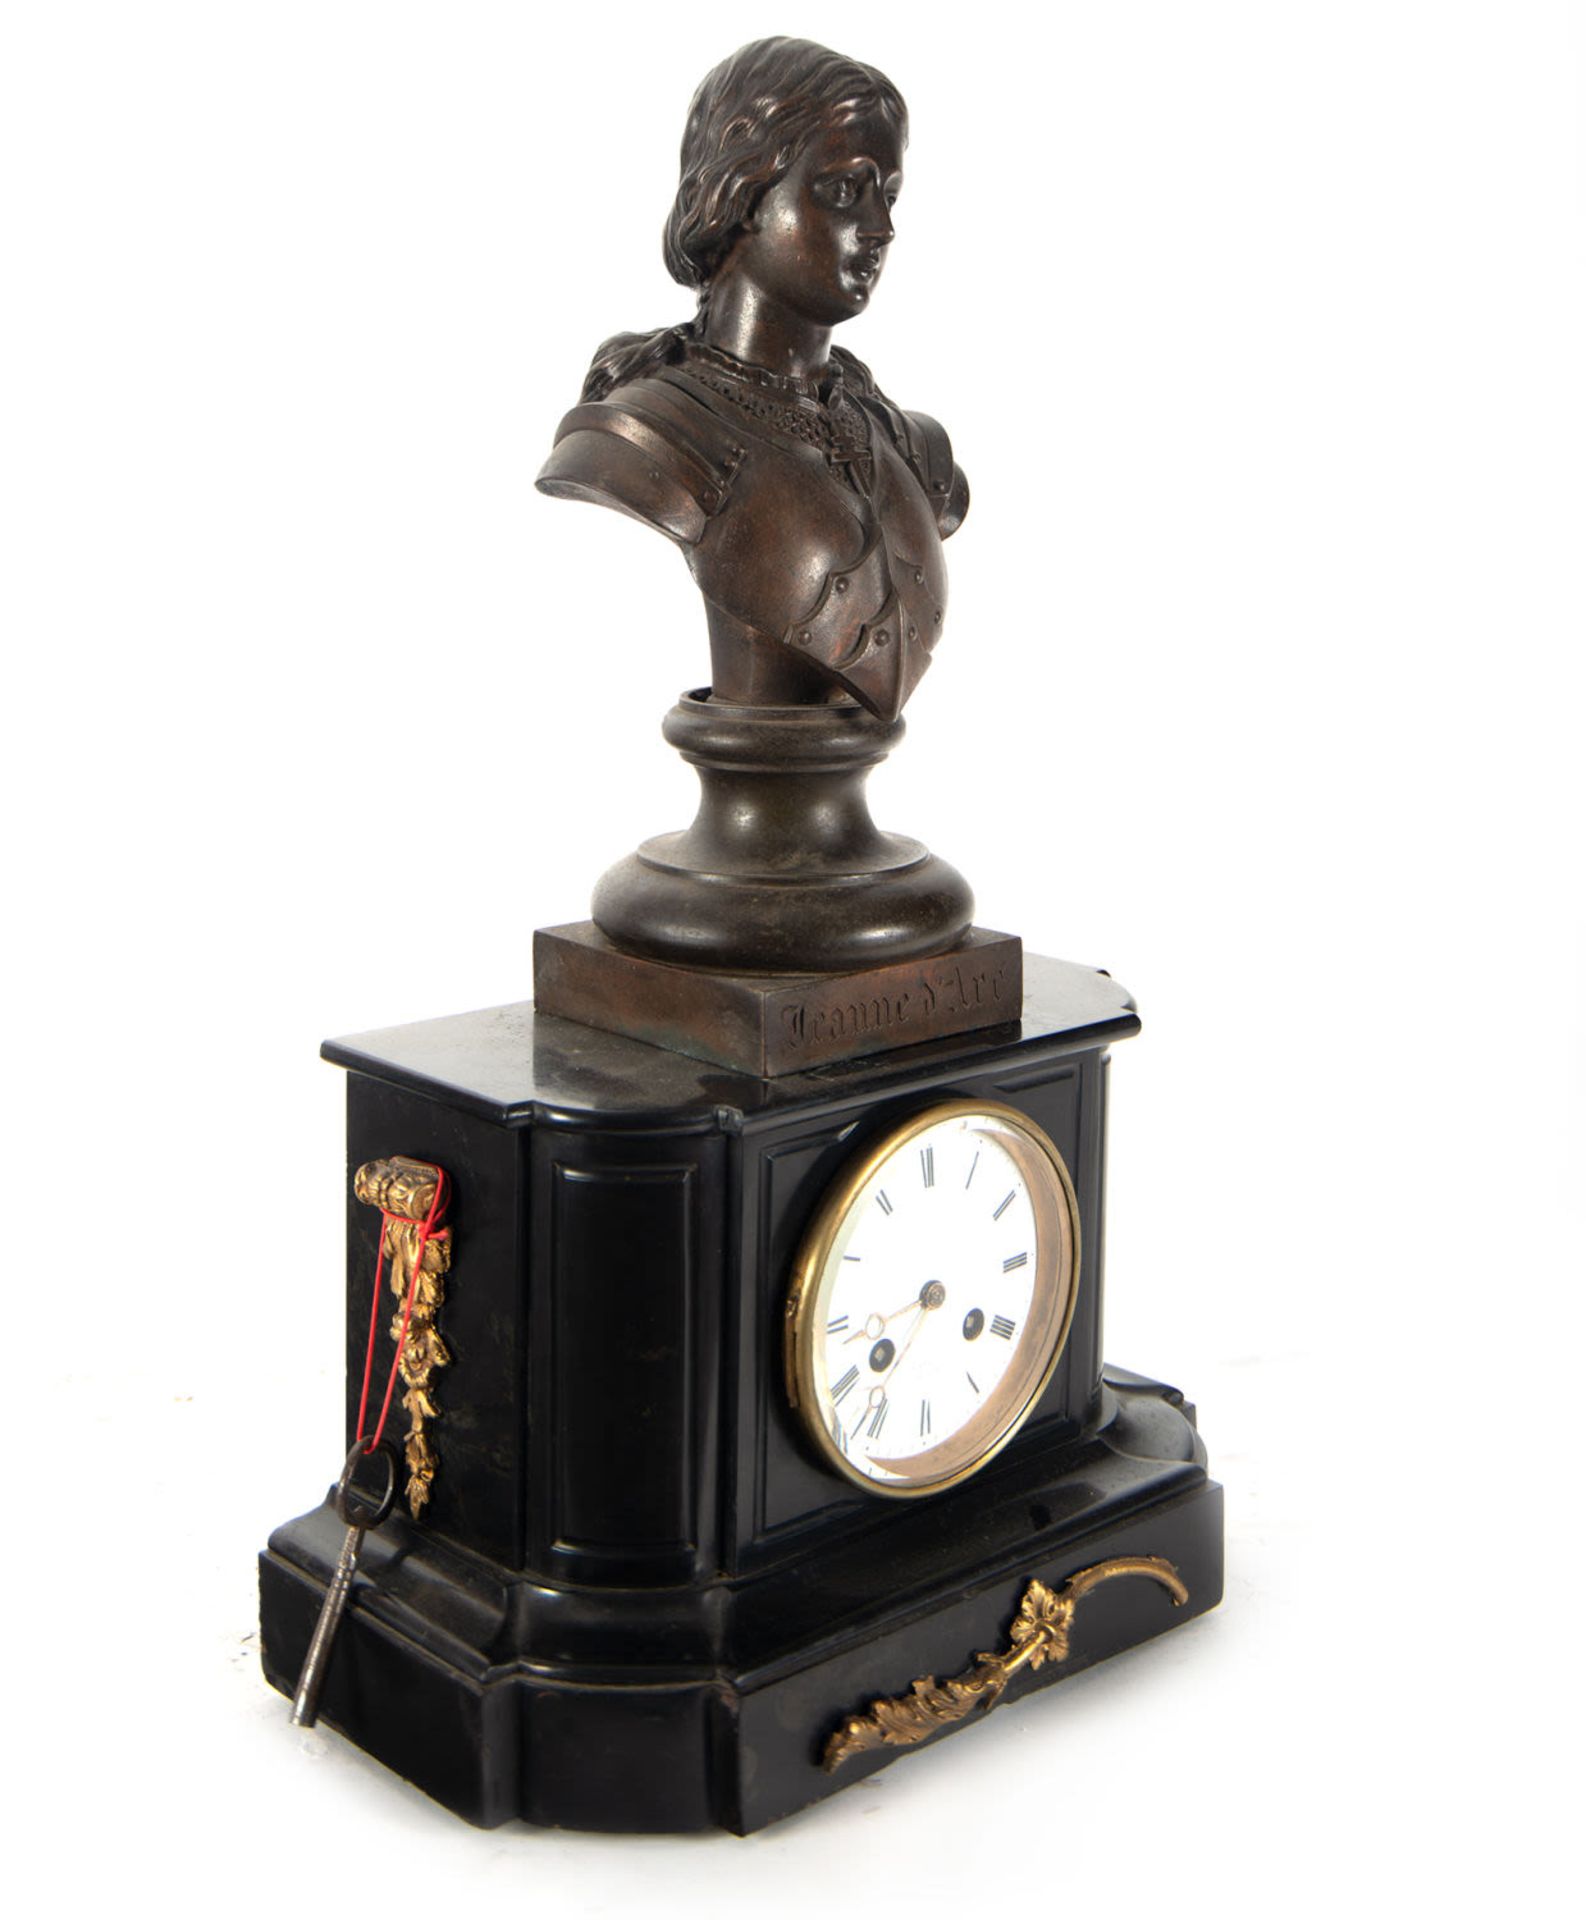 Mantel Clock with Bust of Joan of Arc, 19th Century - Image 2 of 6